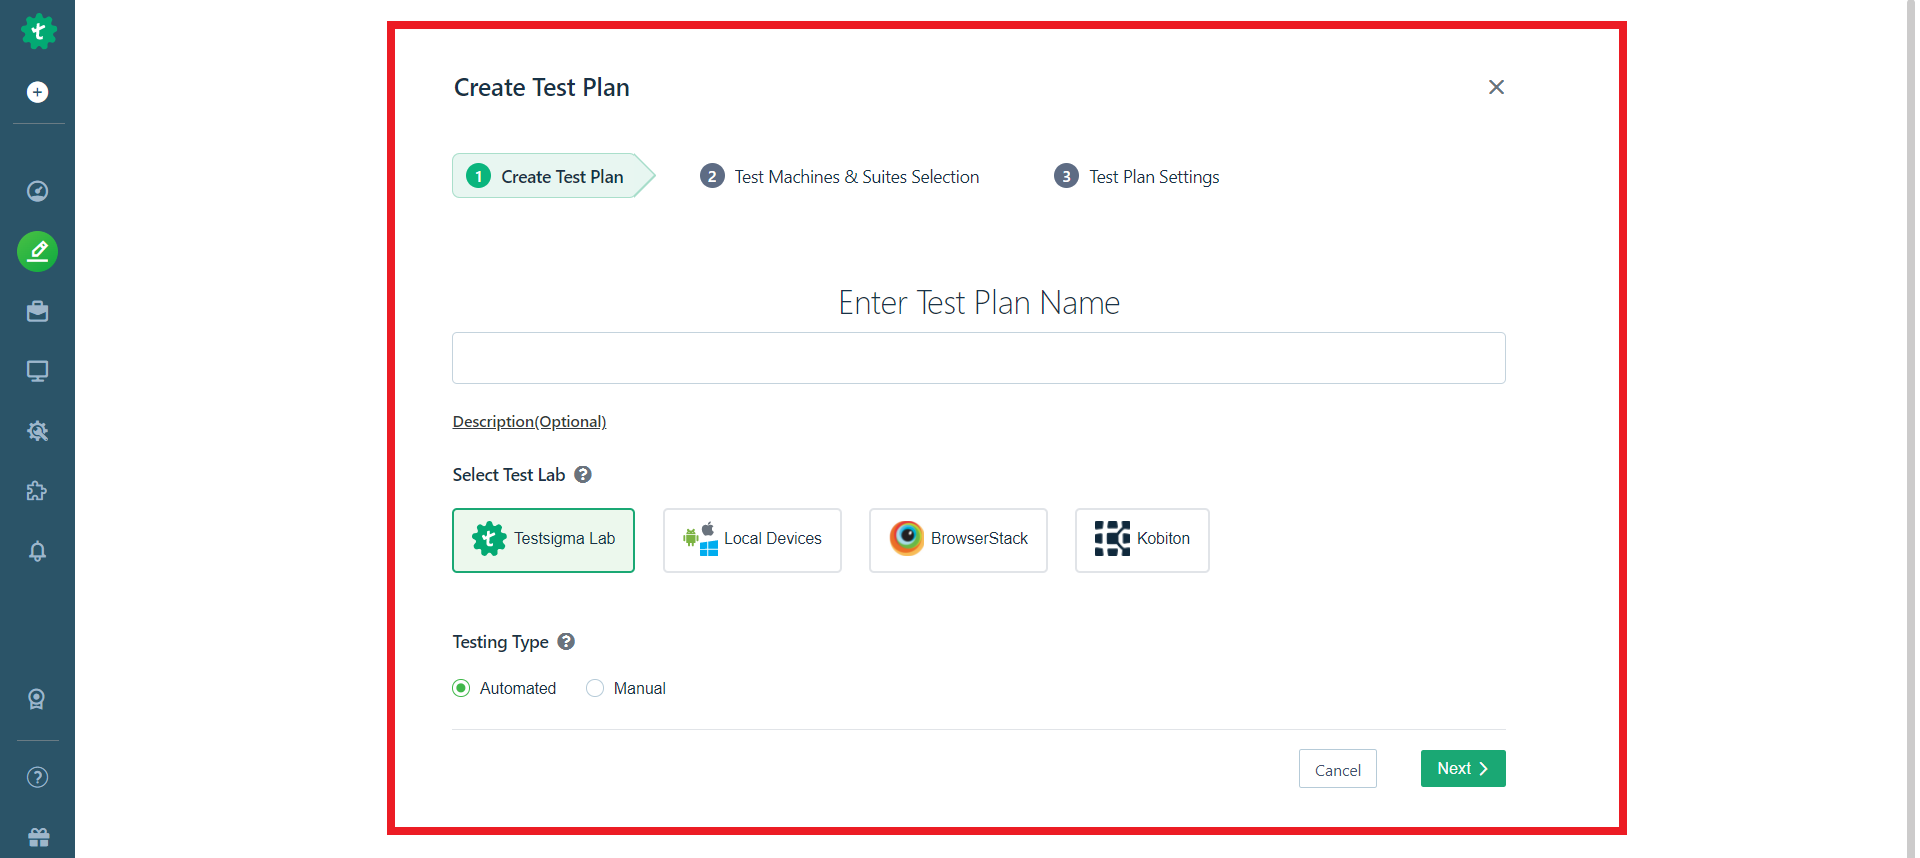 Enter details to create a test plan